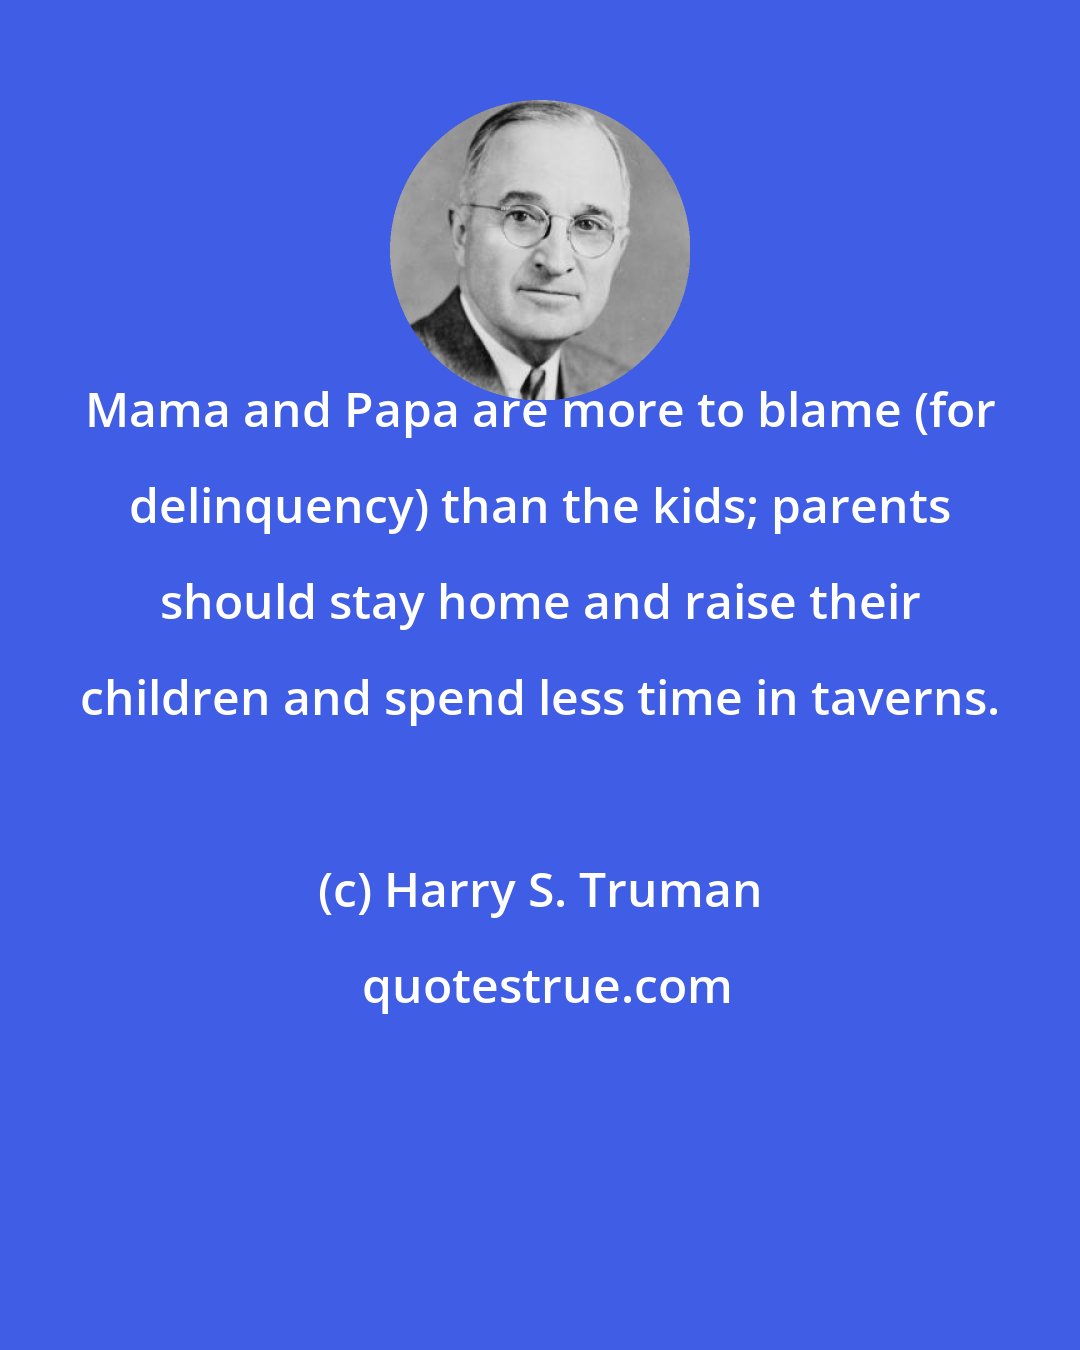 Harry S. Truman: Mama and Papa are more to blame (for delinquency) than the kids; parents should stay home and raise their children and spend less time in taverns.